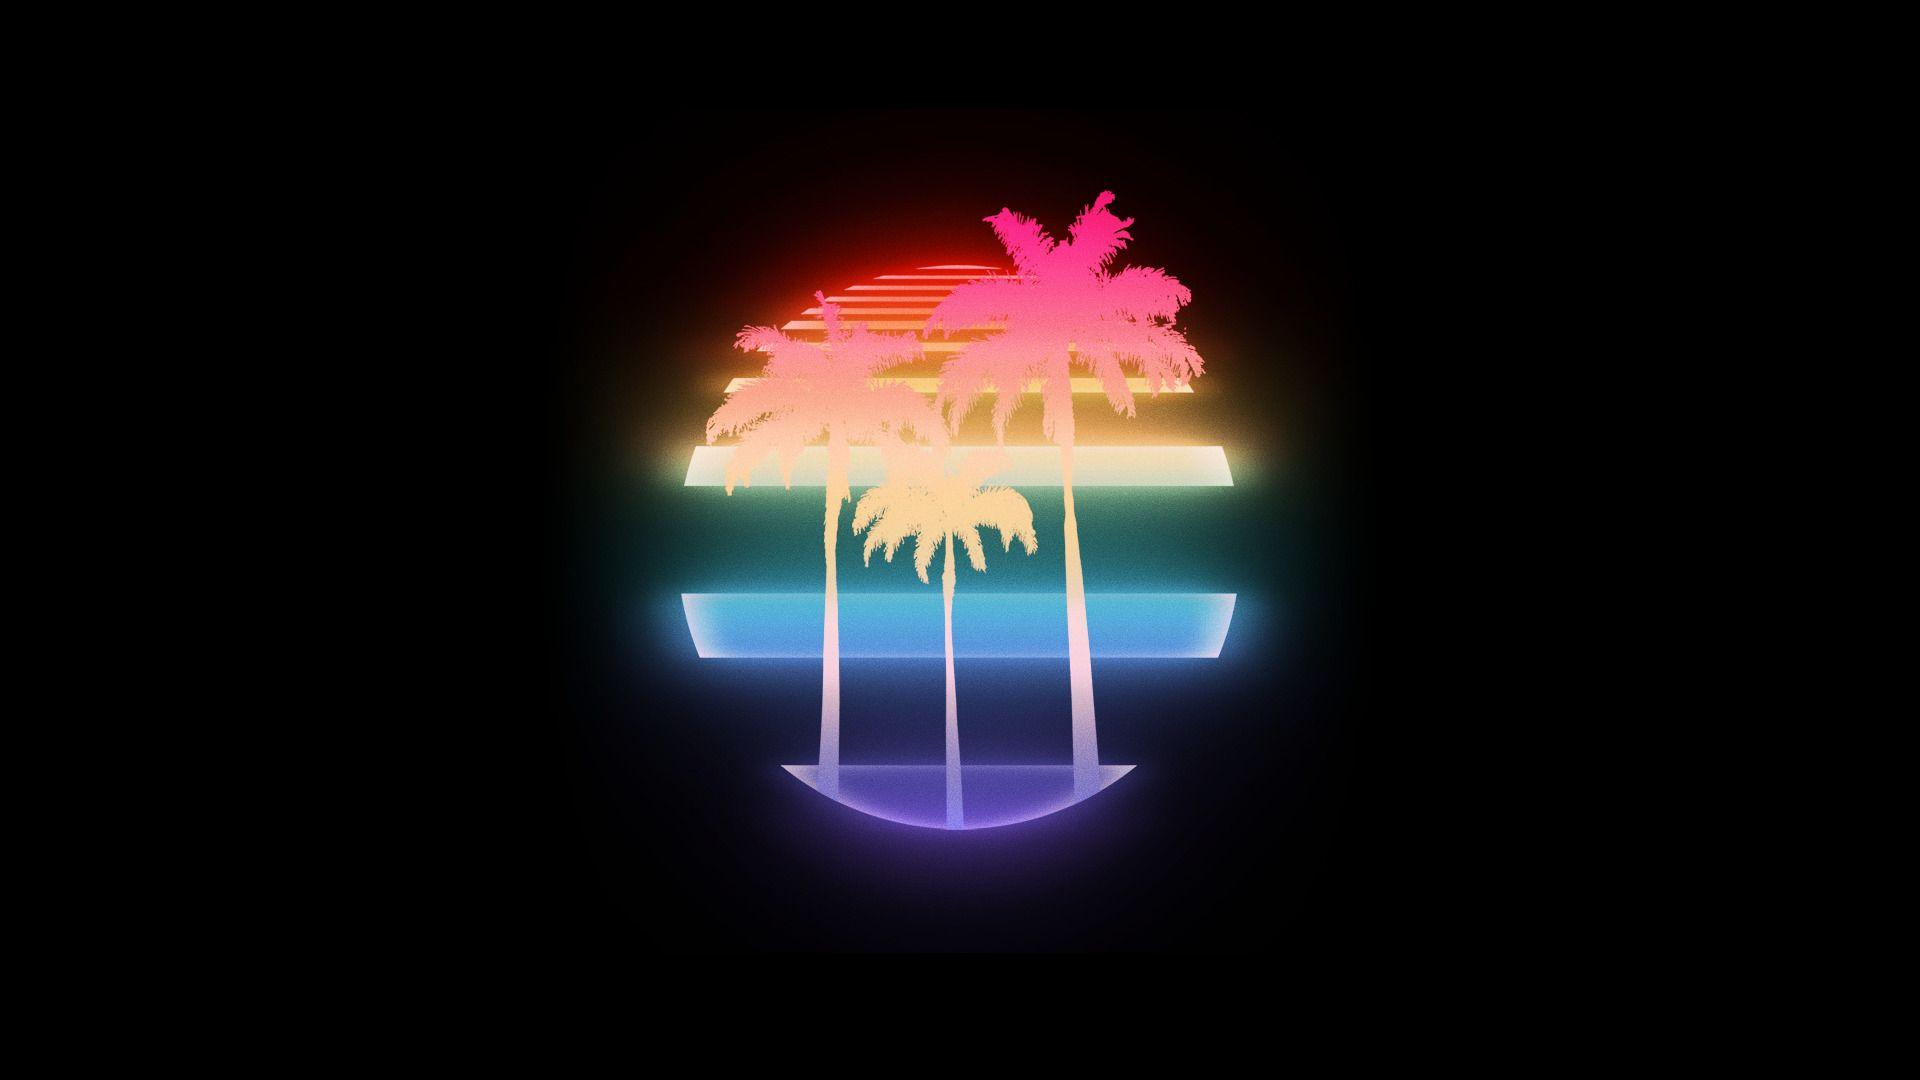 Aesthetic neon palm trees wallpaper for your phone or desktop. - VHS